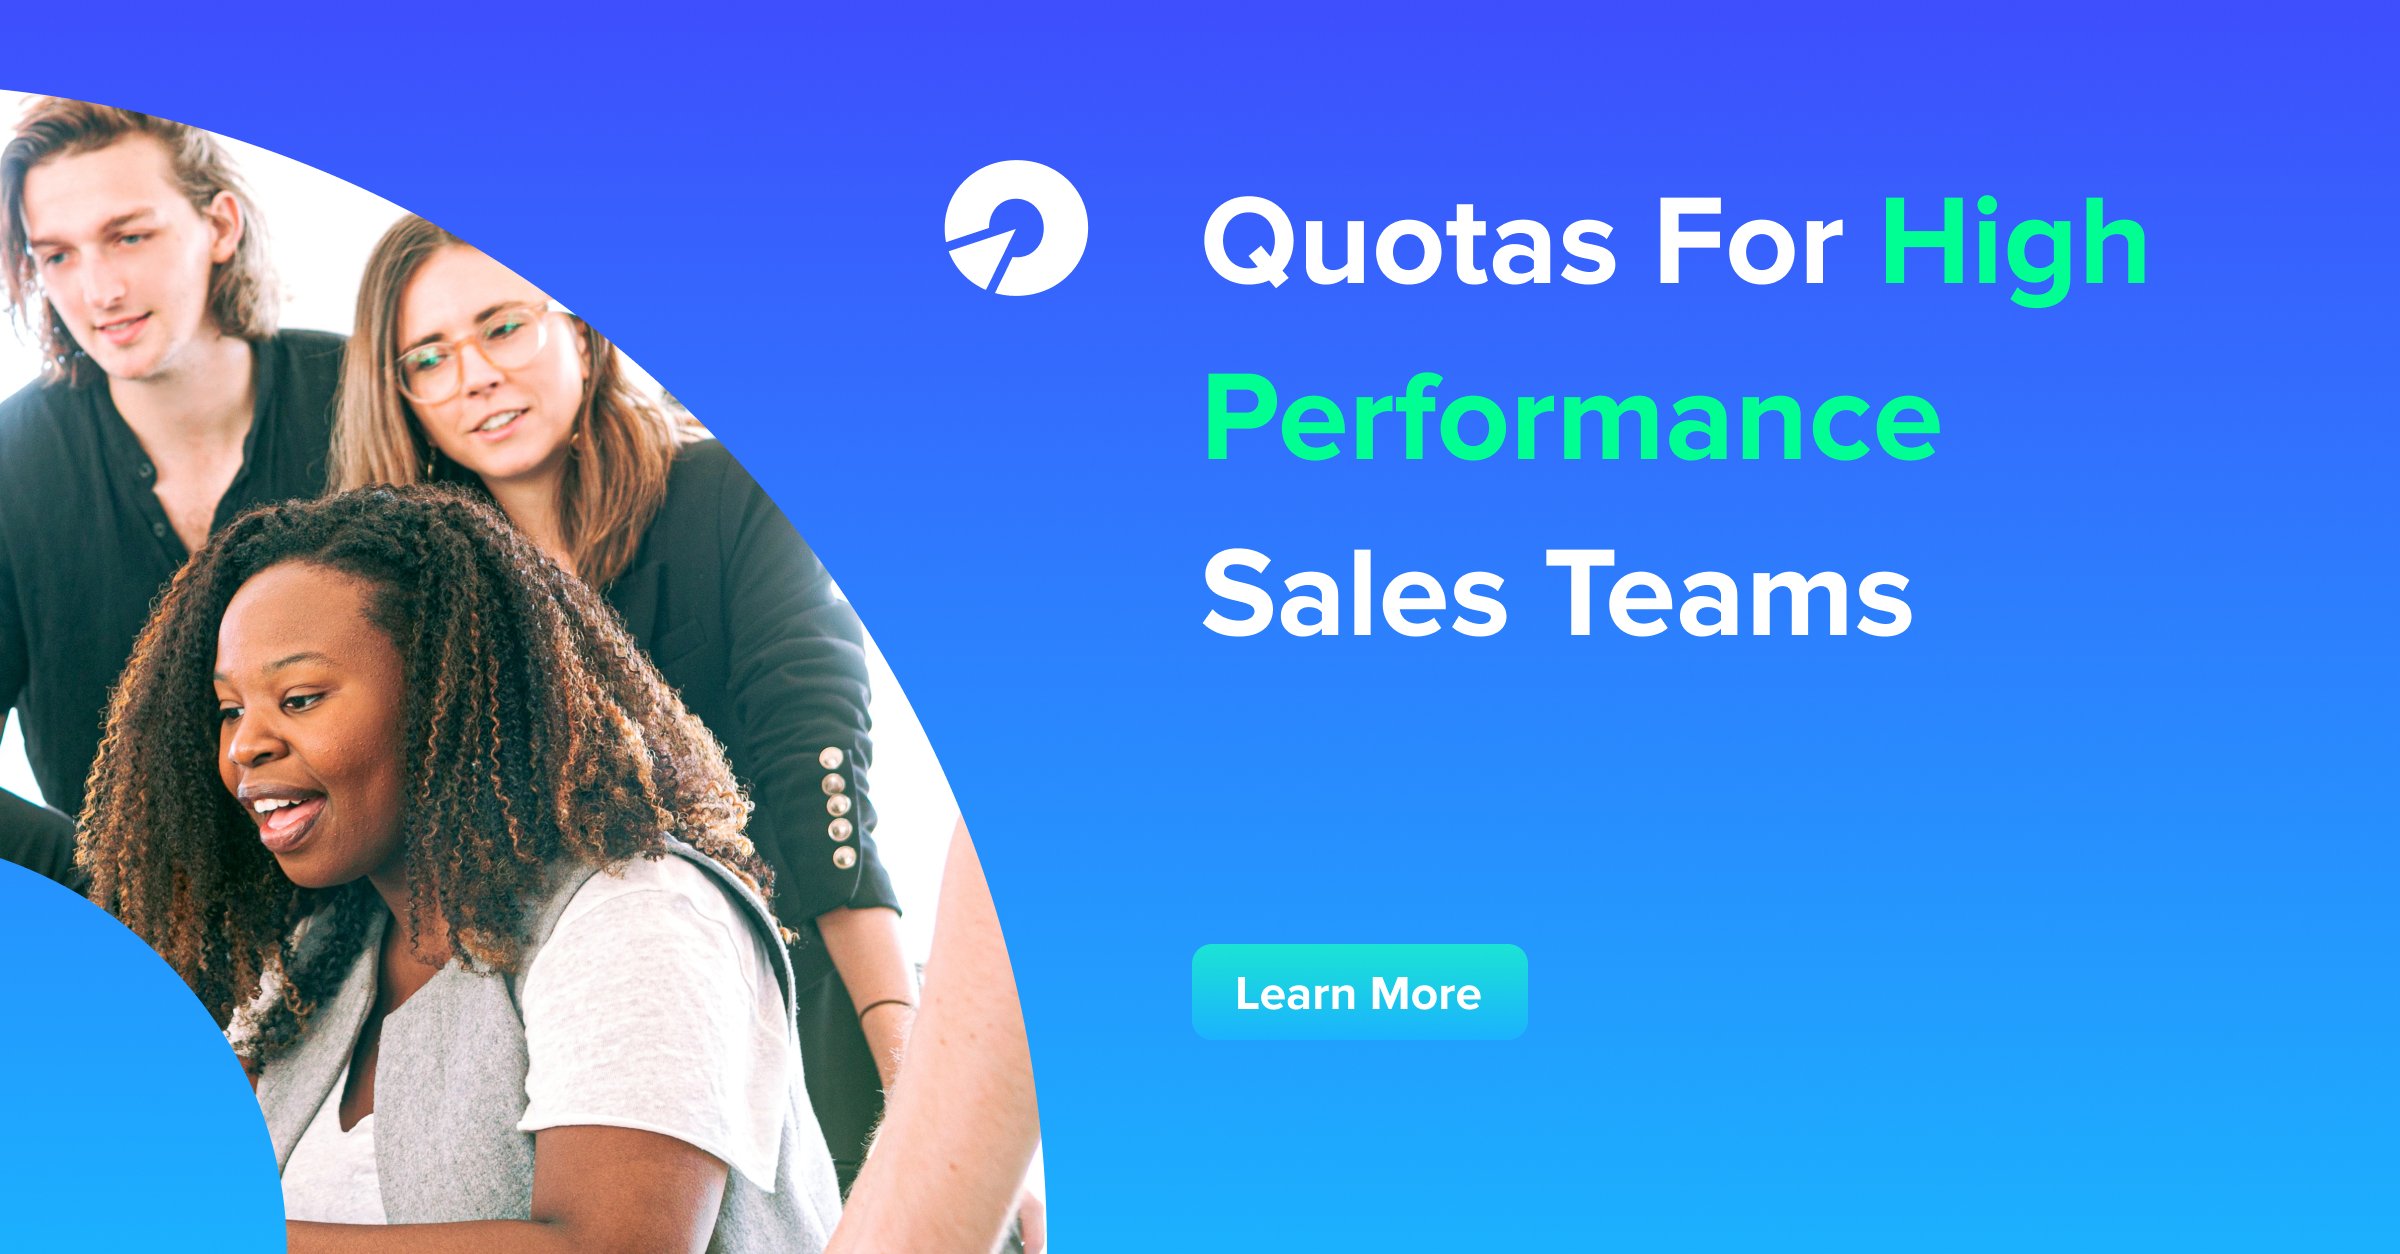 Quotas For High-Performance Sales Teams